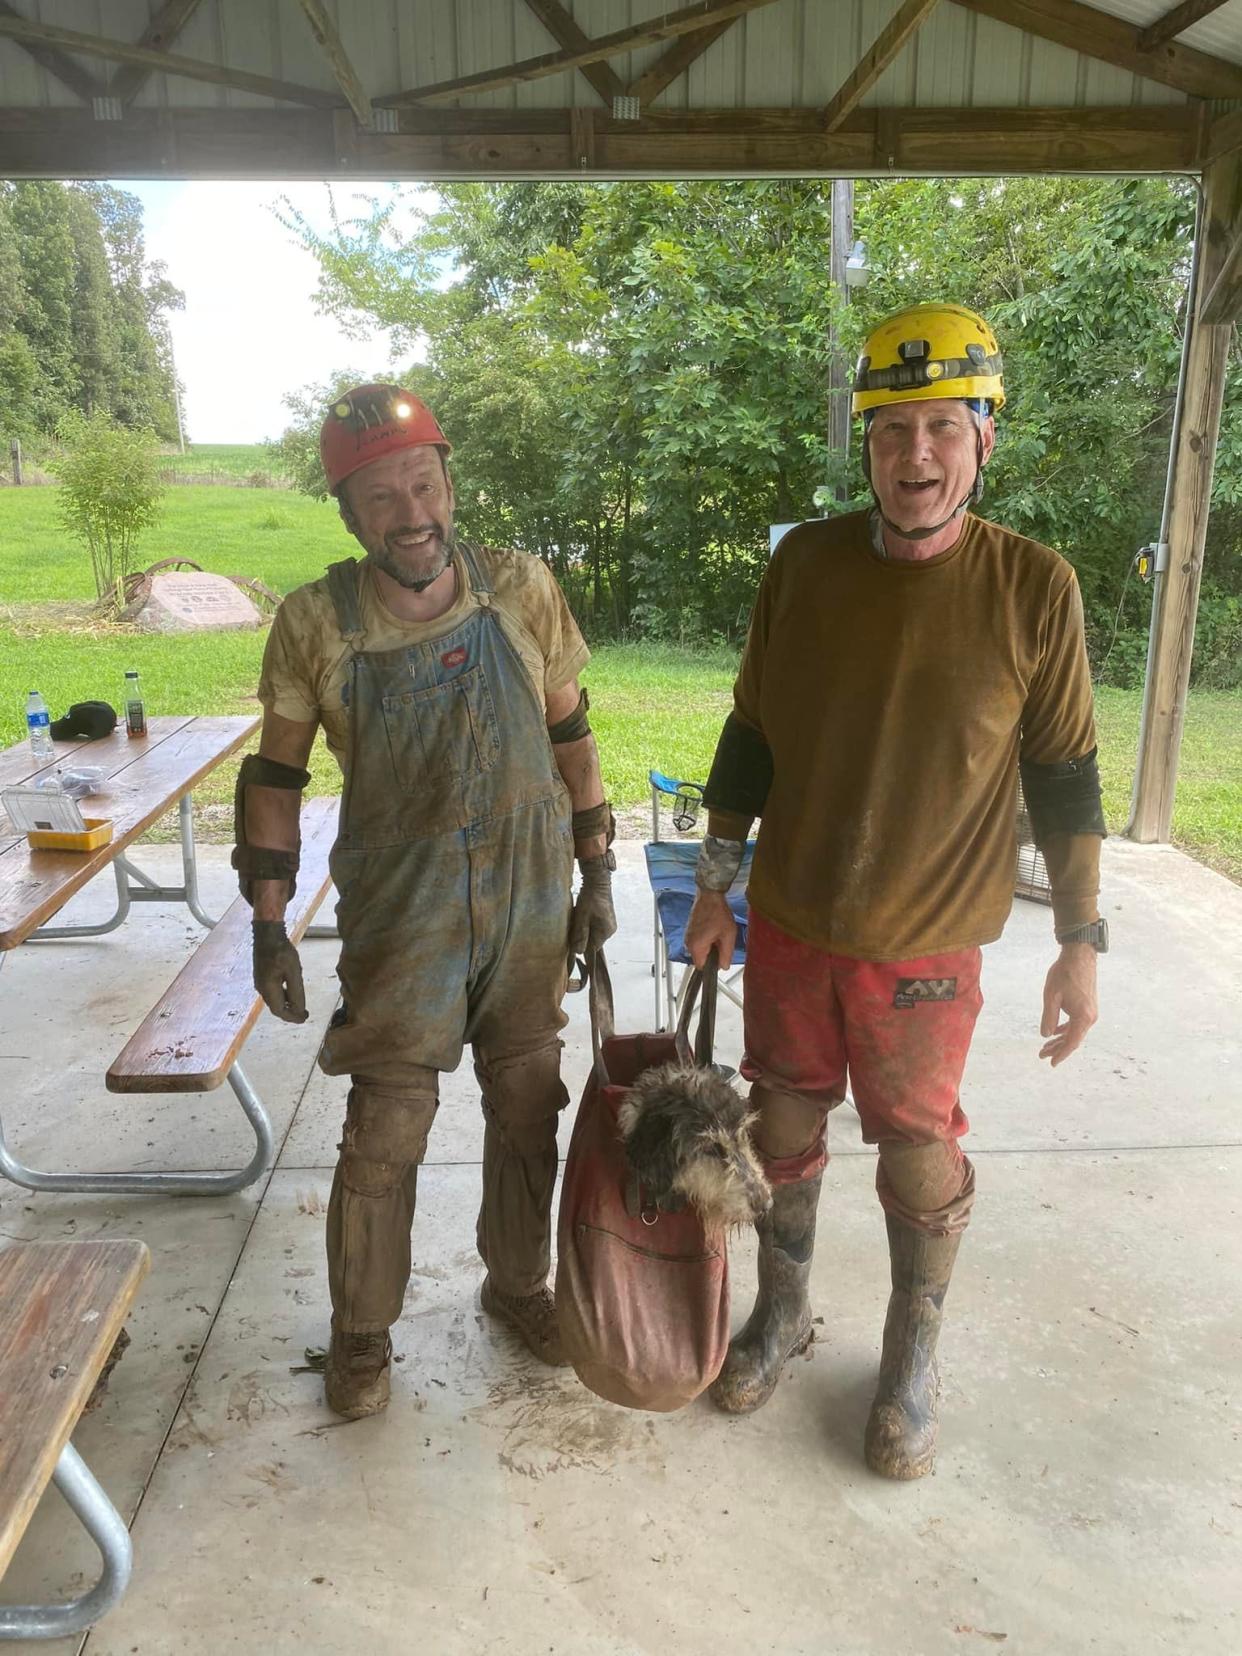 Recreational cavers Gerry Keene, left, and Rick Haley, right, carry Abby, a 13-year-old dog who reportedly went missing on June 9, after staging a rescue operation to help save the dog on Aug. 6, Haley said.